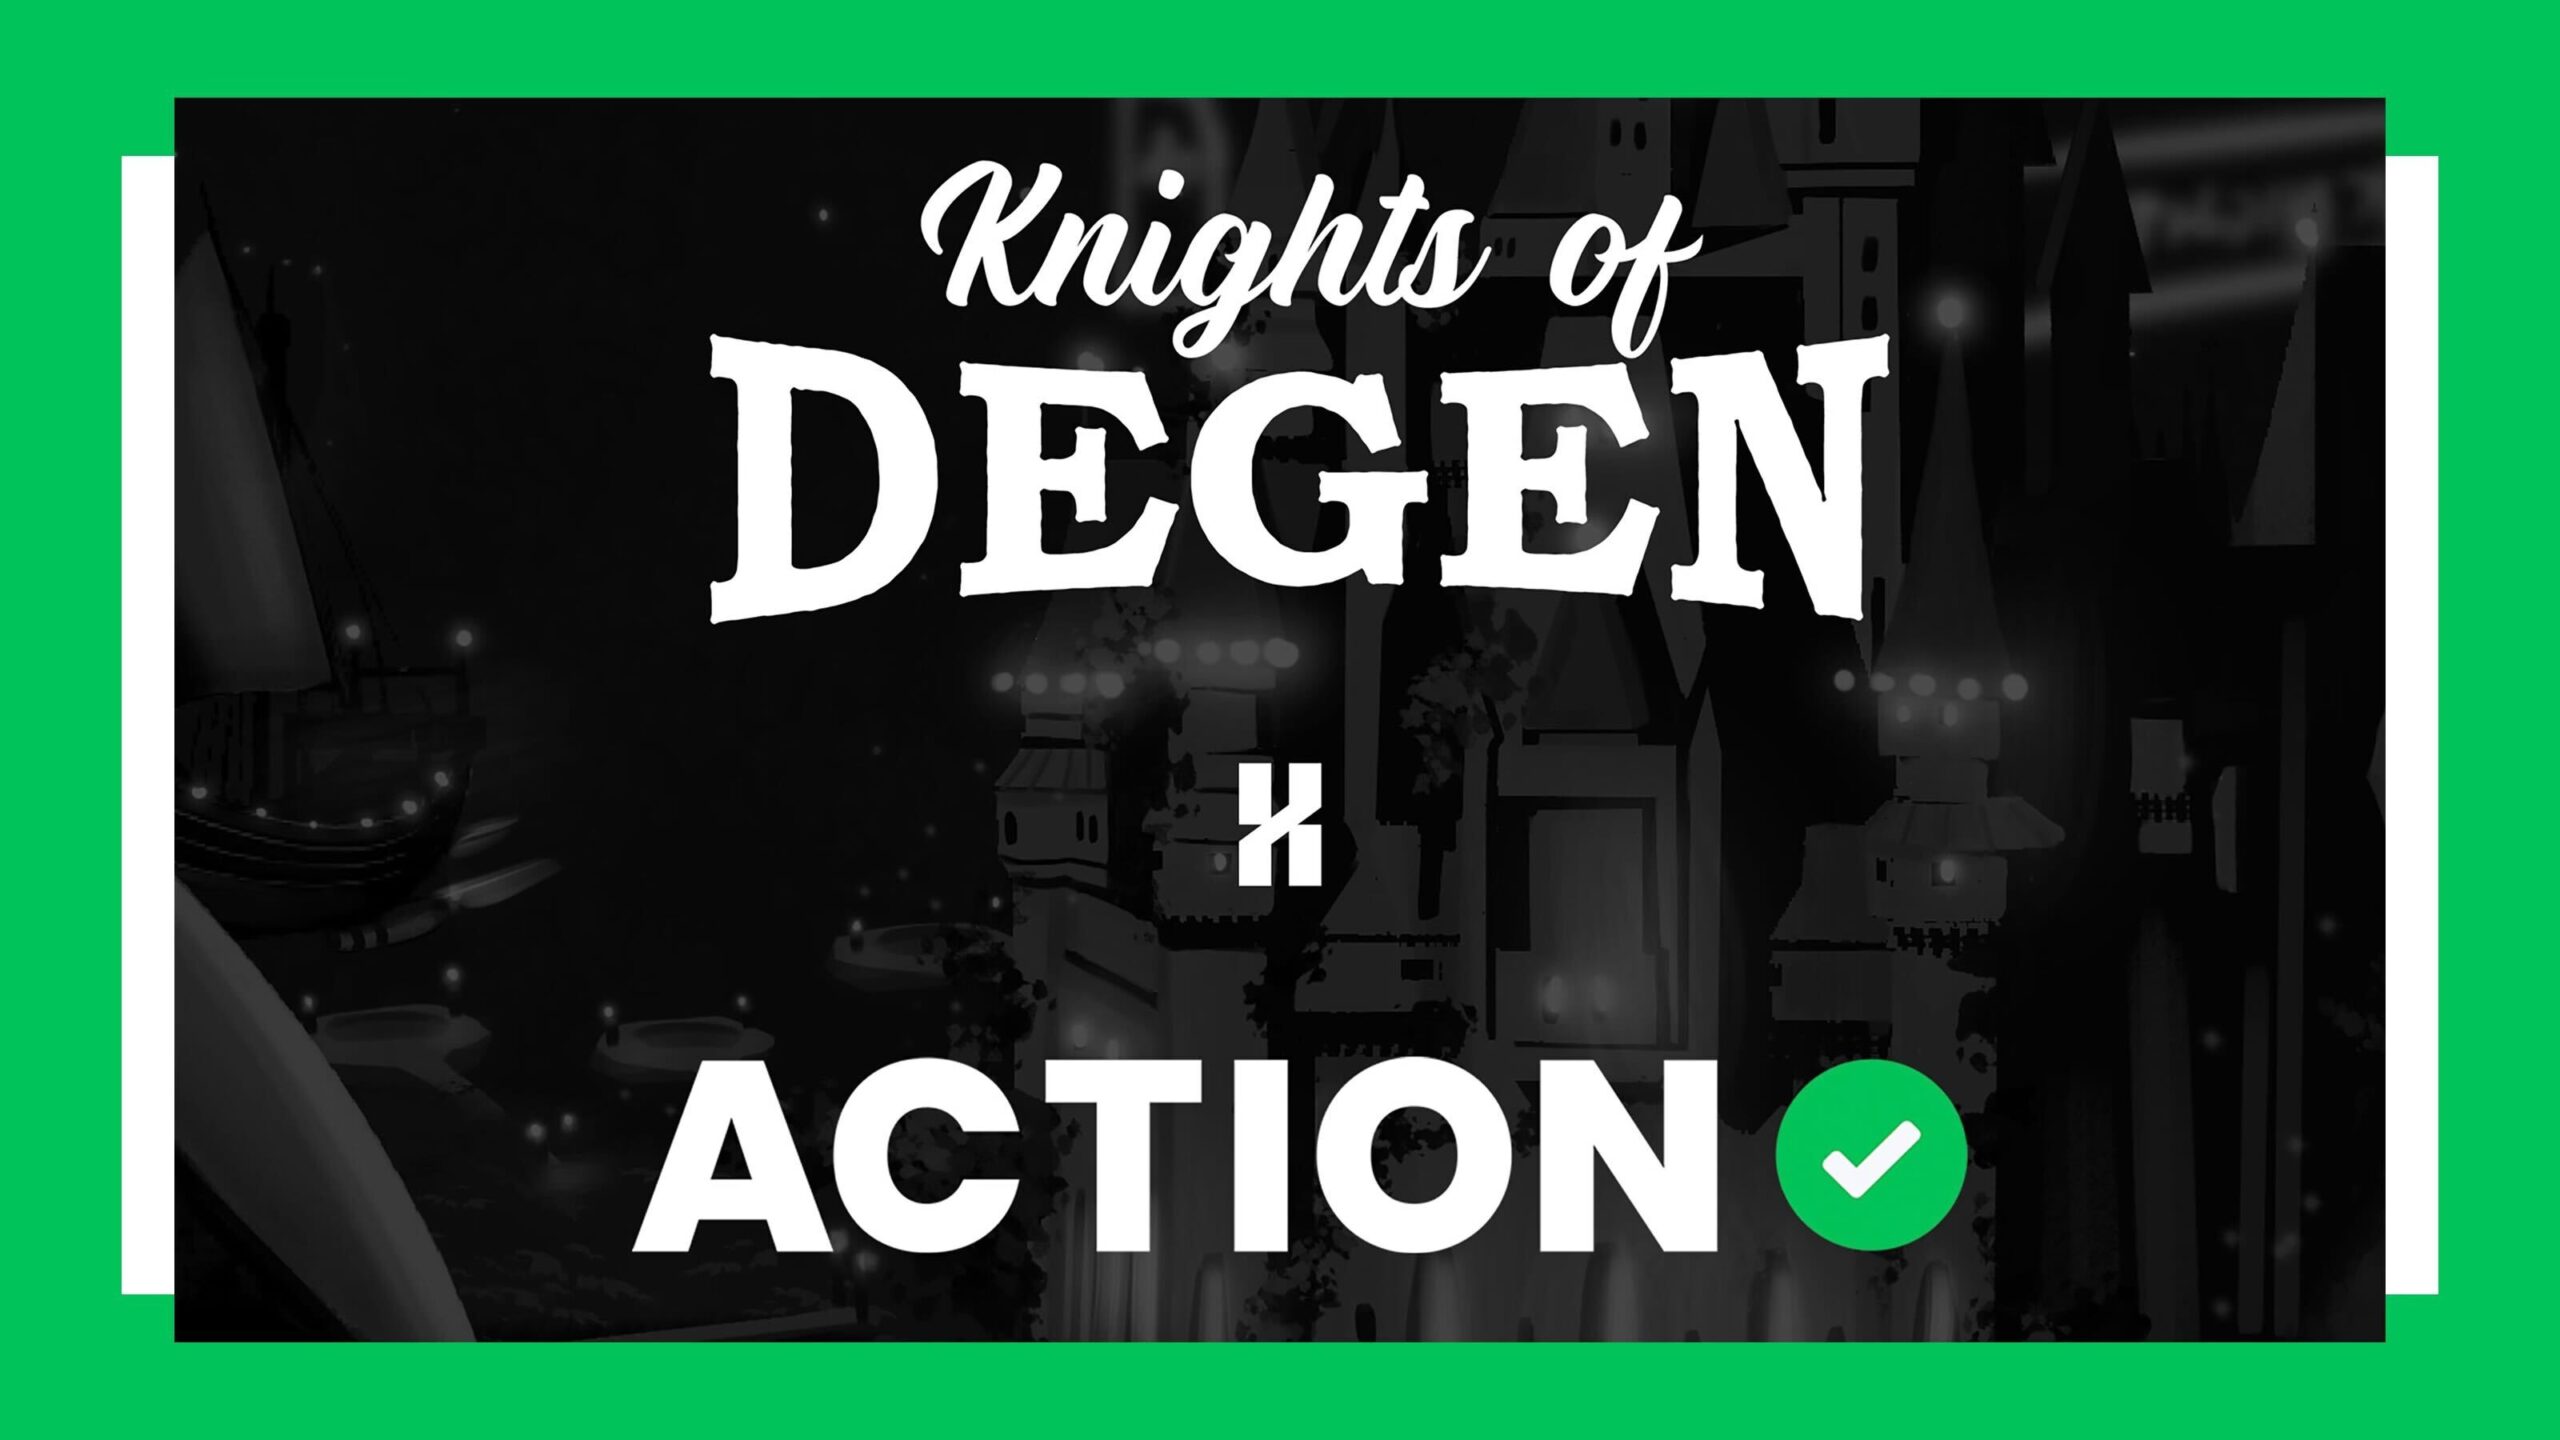 Knights of Degen Launches Partnership with Action Network, Better Collective Image